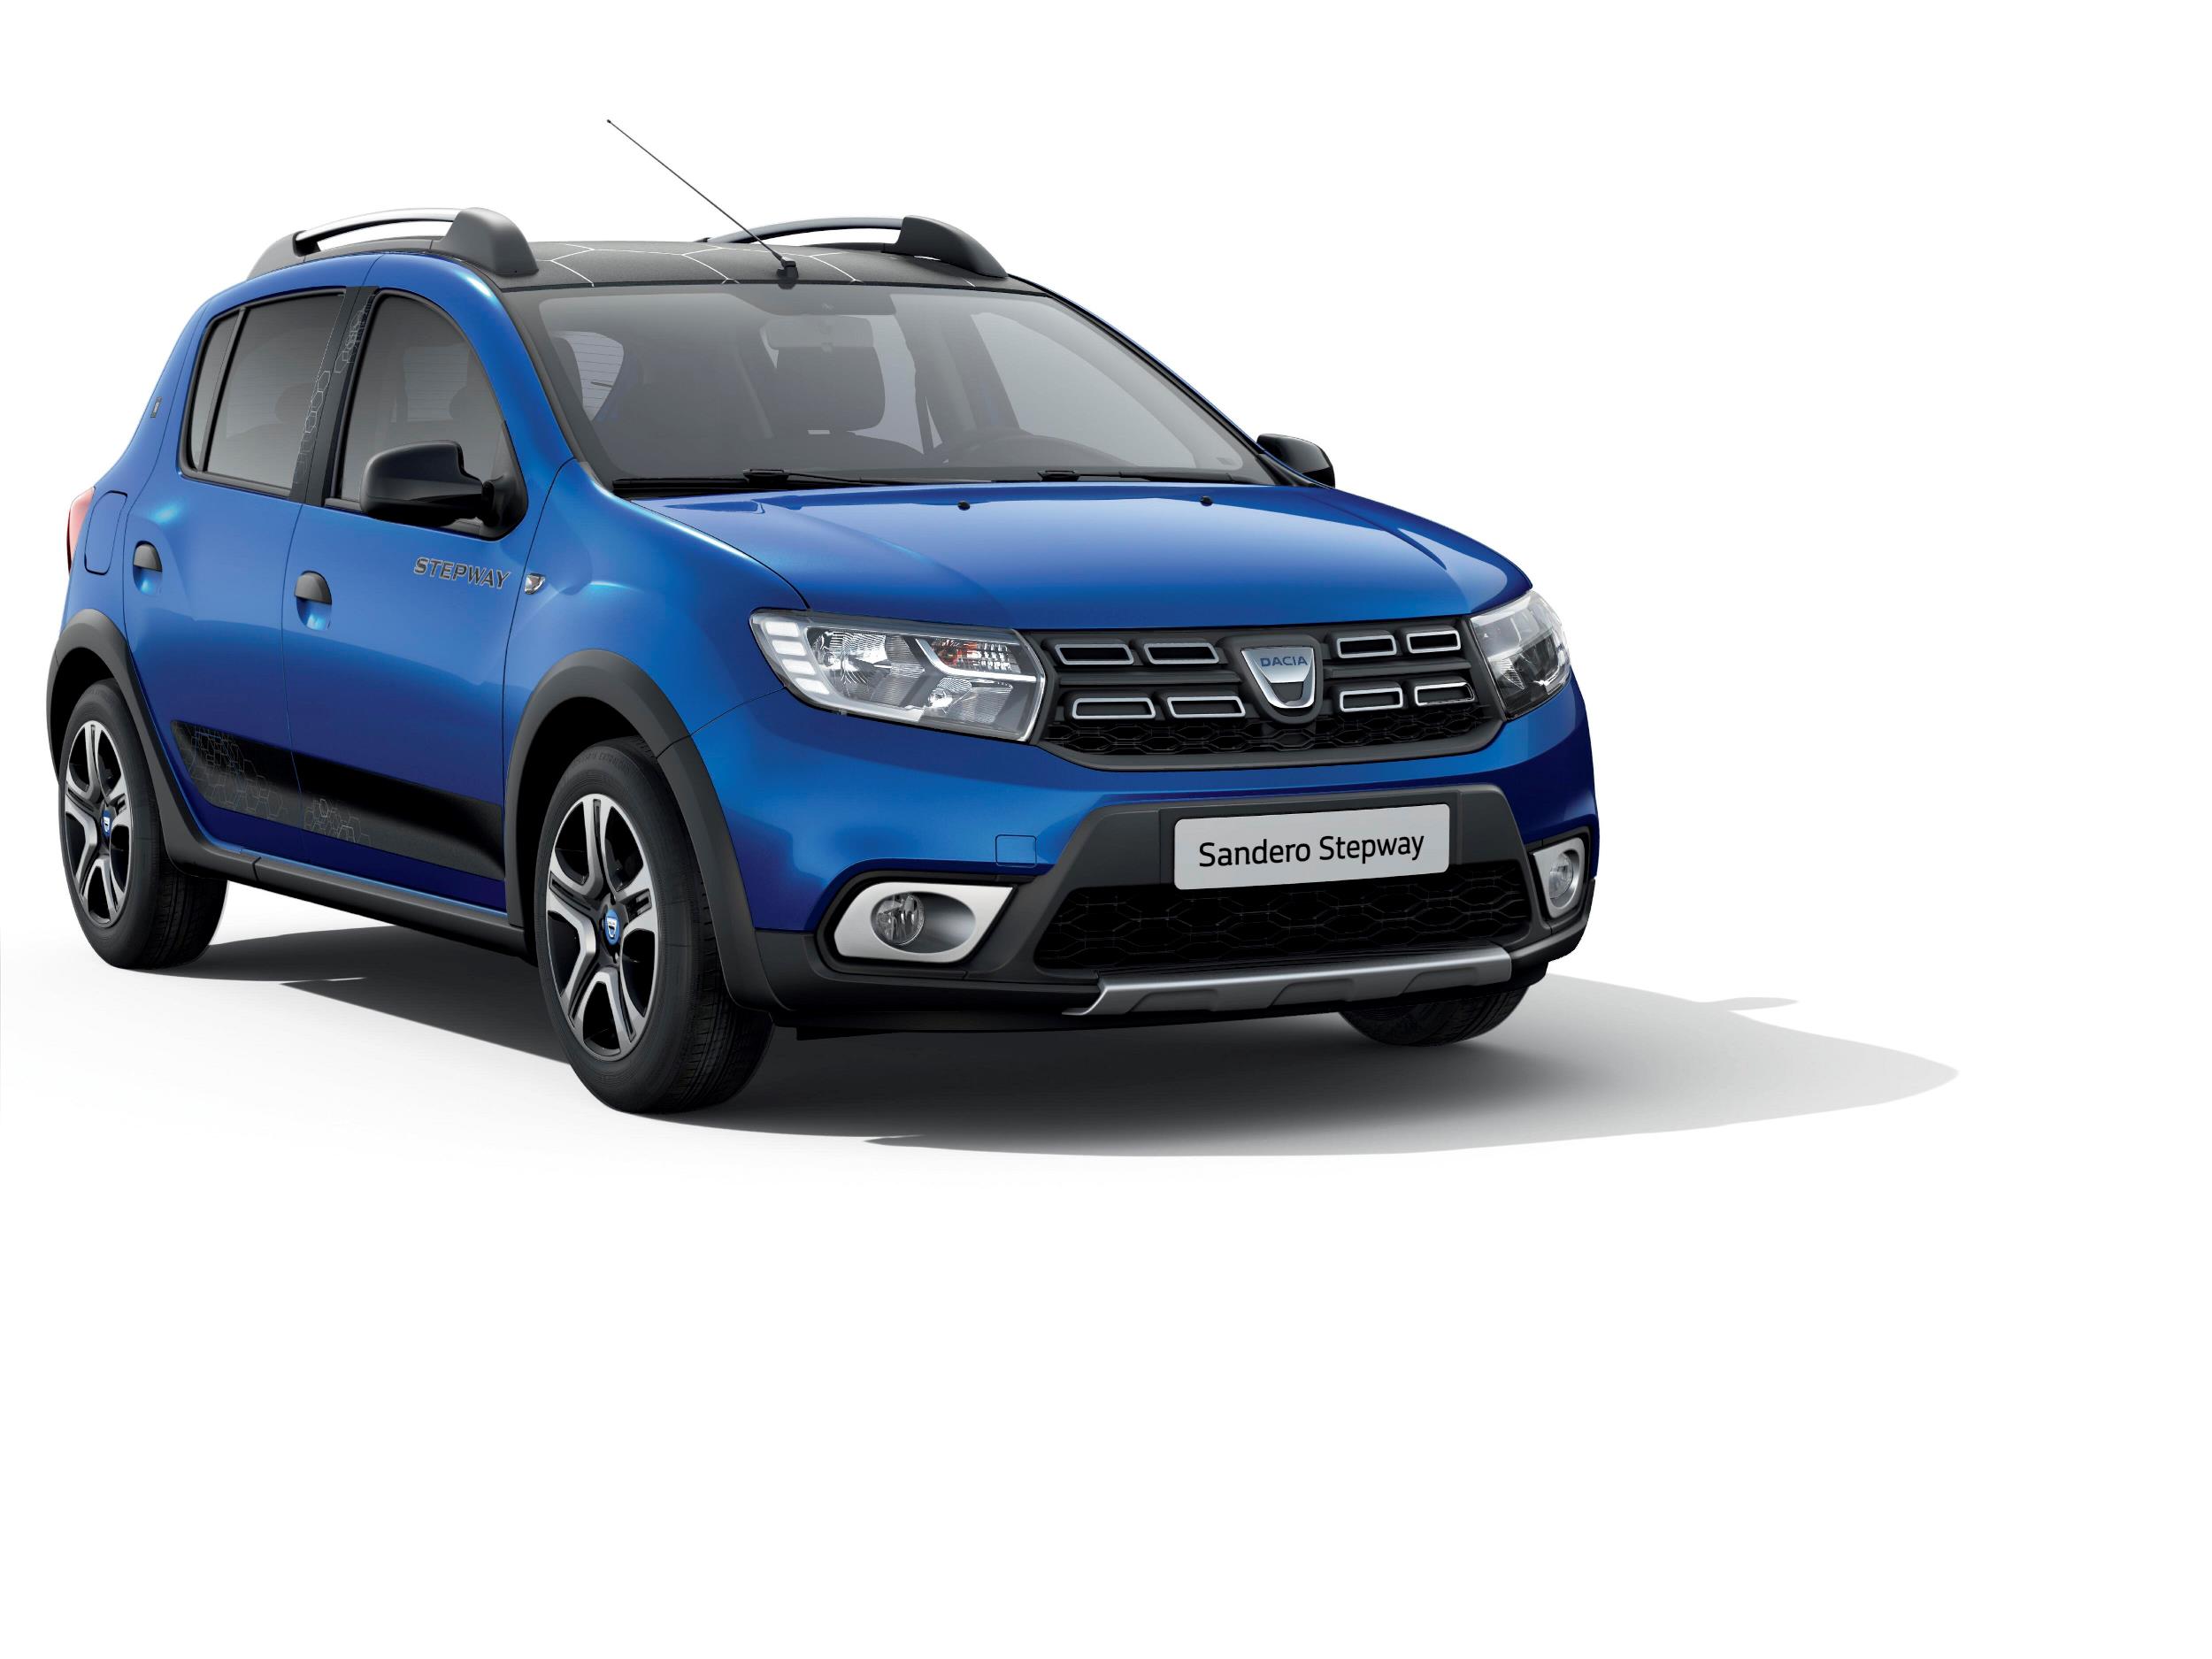  2022  Dacia Grand Duster  Rendered With New Sandero Stepway 